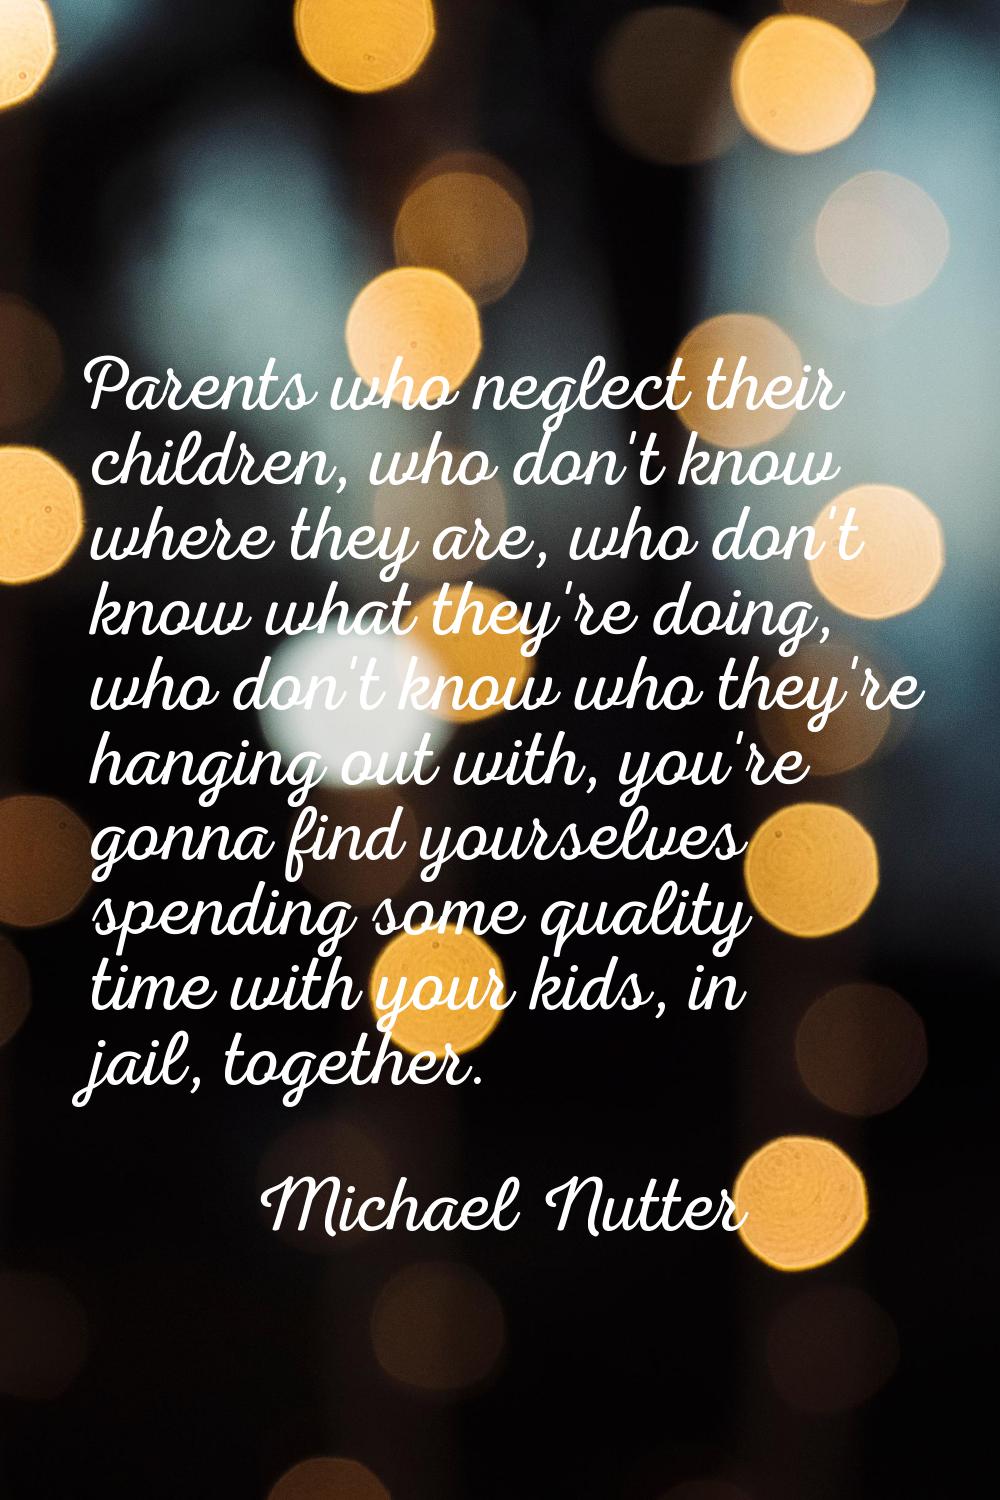 Parents who neglect their children, who don't know where they are, who don't know what they're doin